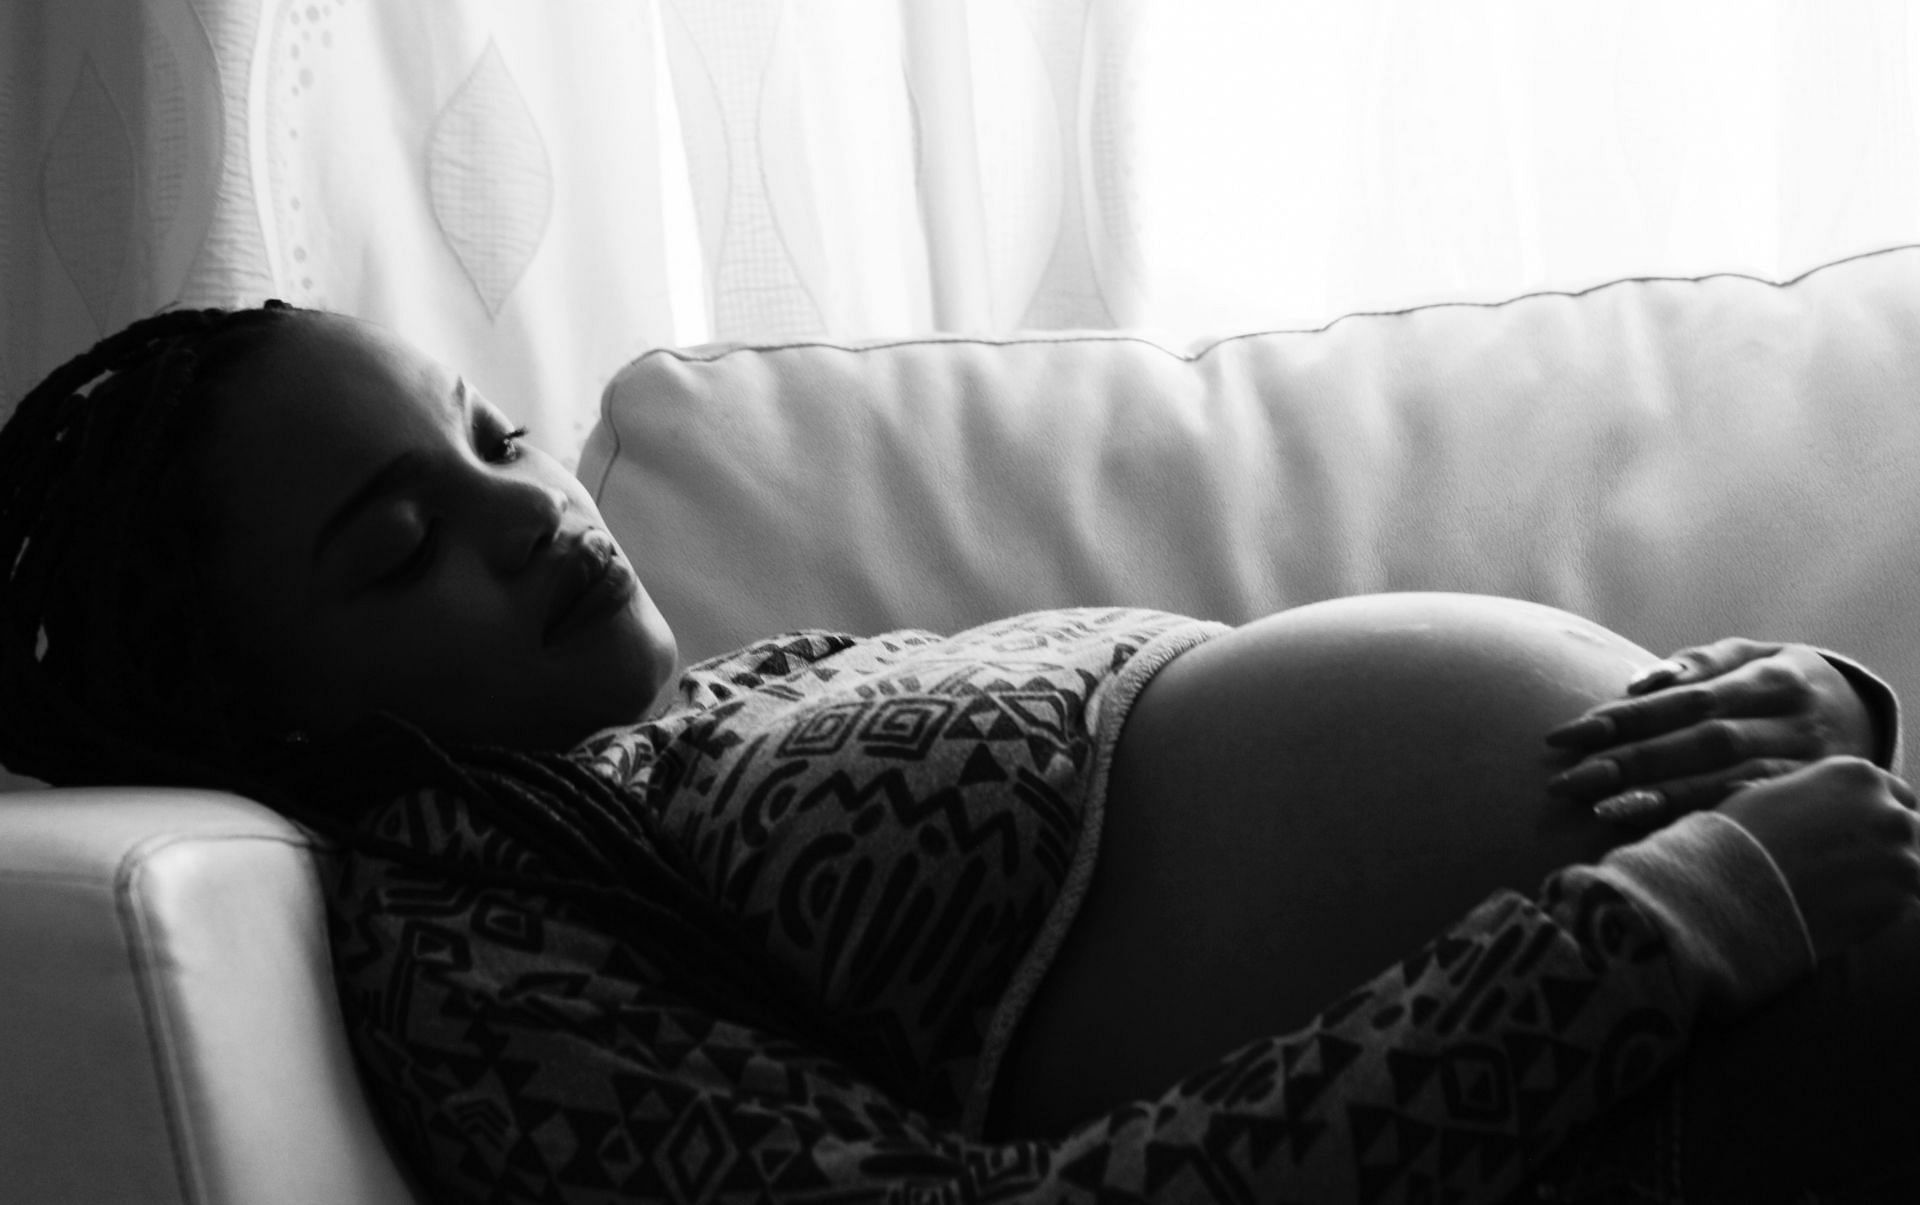 It is important to take care during all phases of pregnancy. (Image via Unsplash/ Dexswaggerboy)